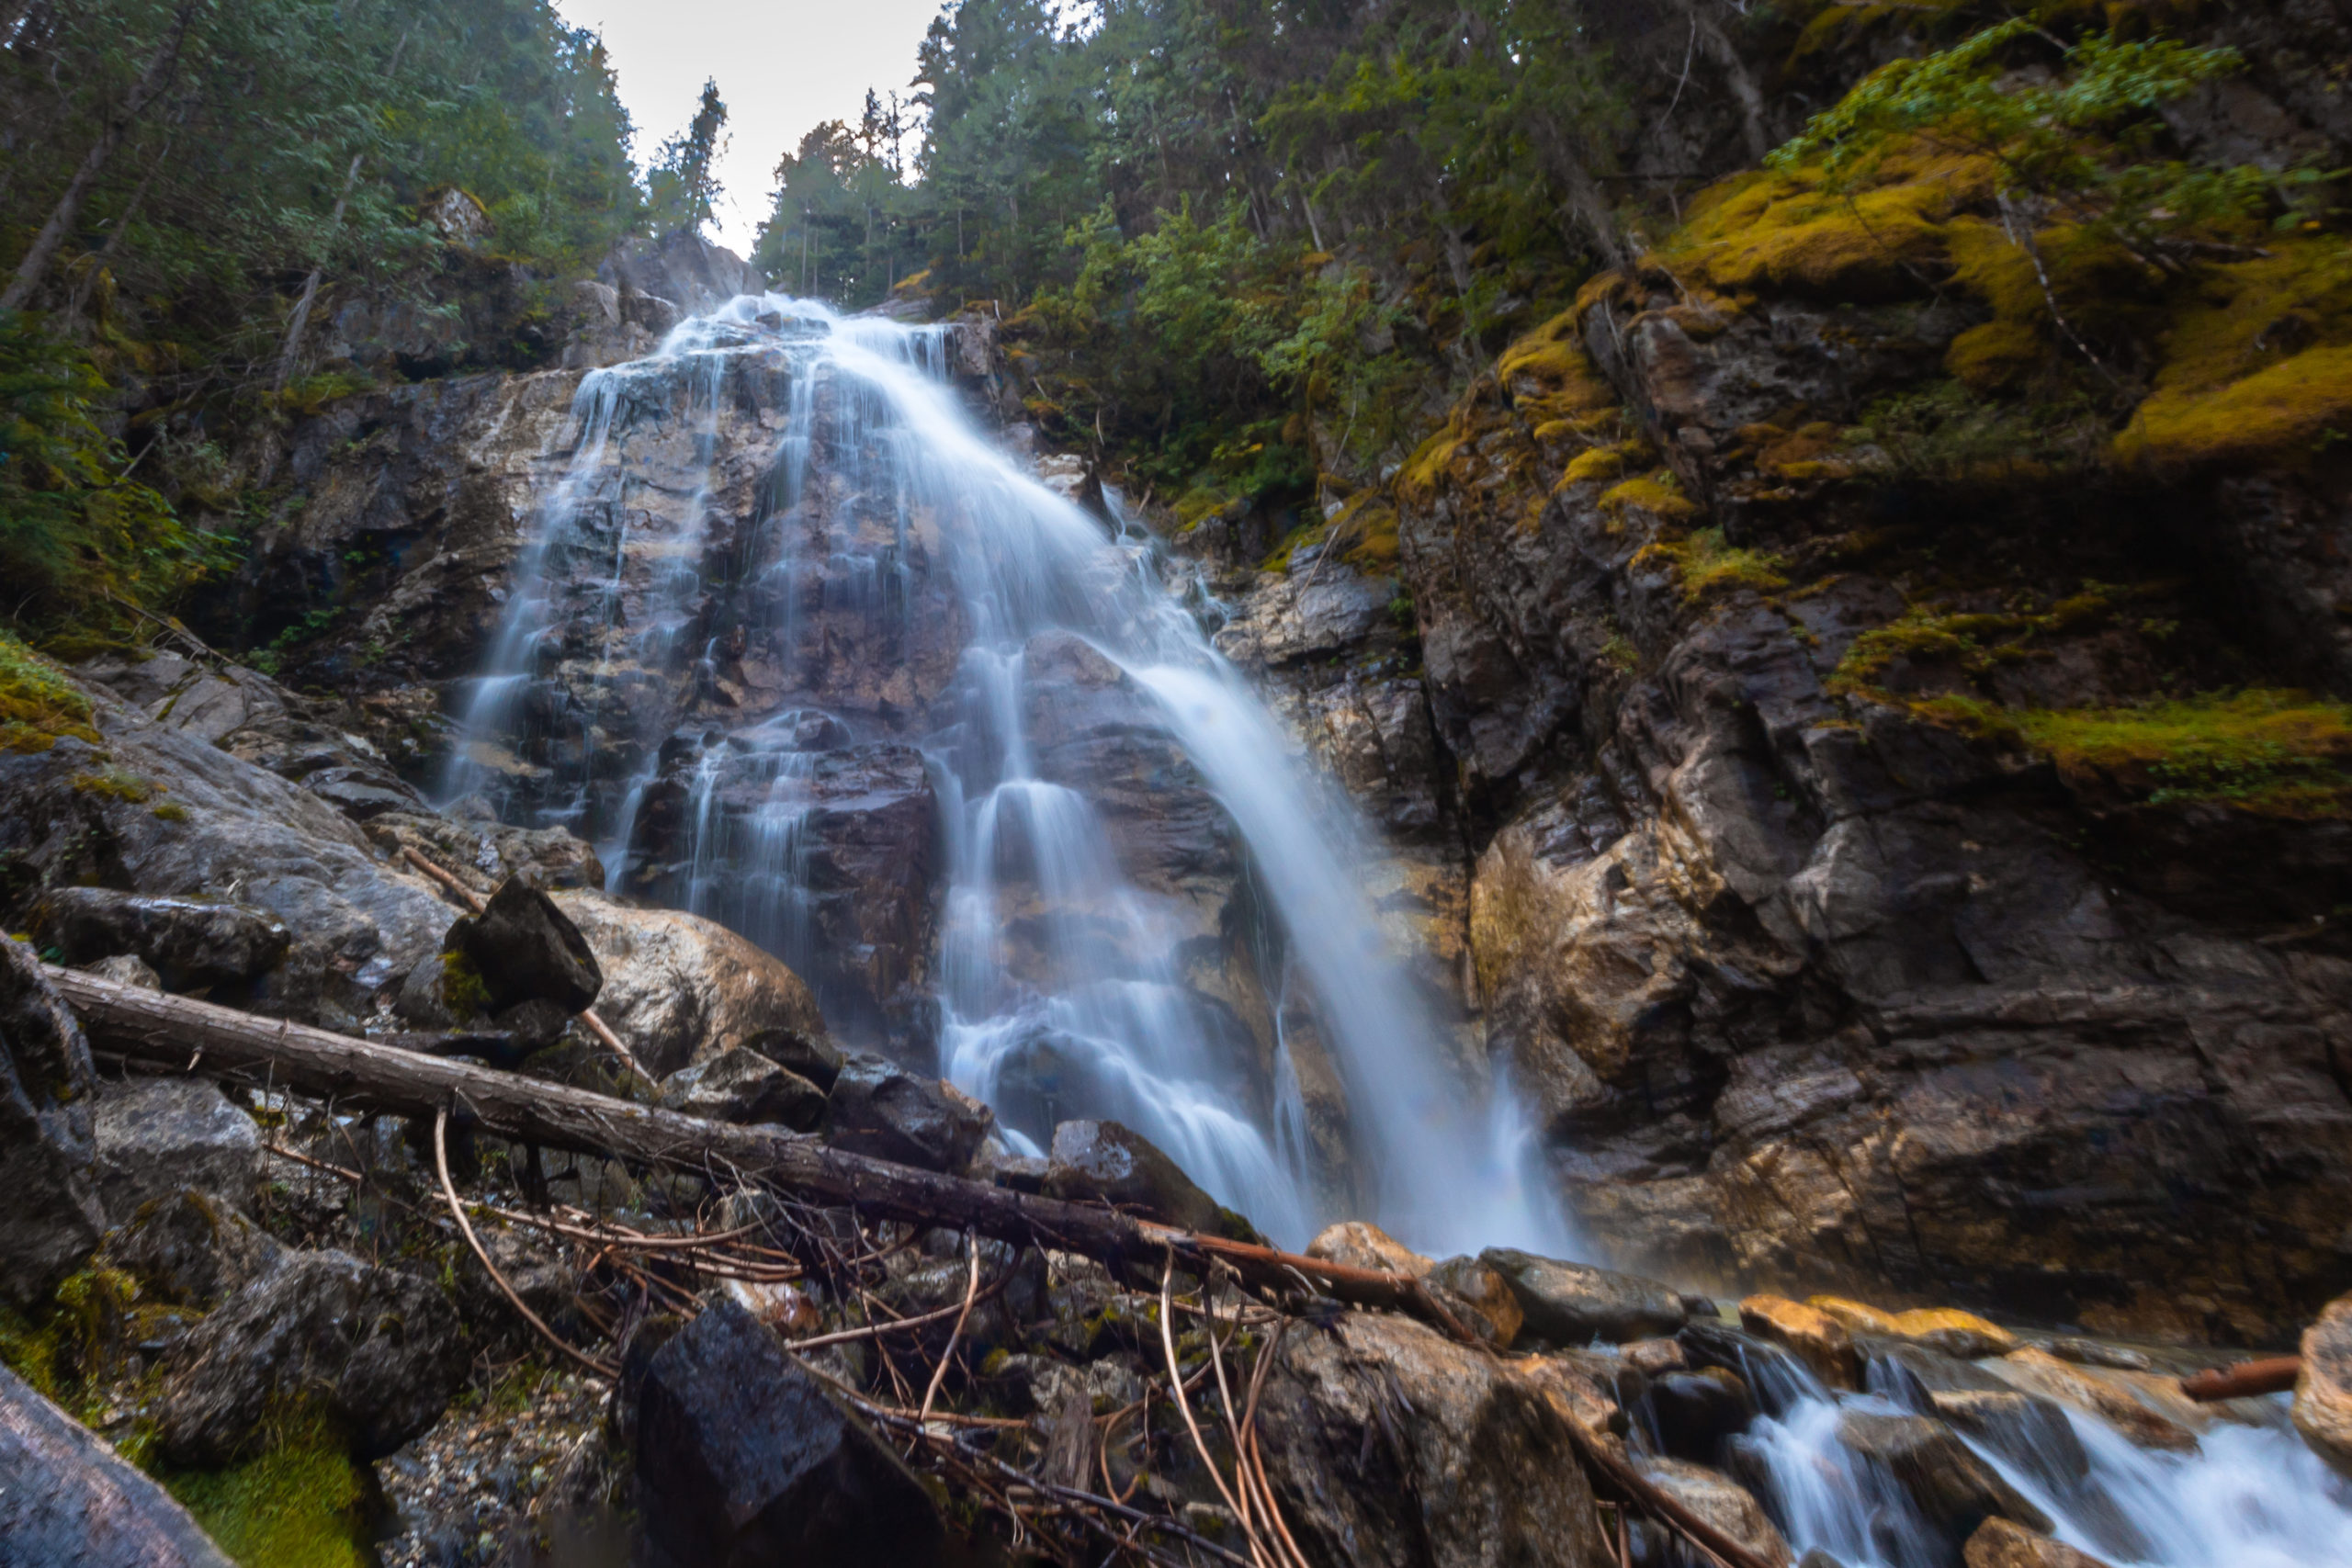 Kay Falls on the Trans-Canada Highway between Sicamous and Revelstoke